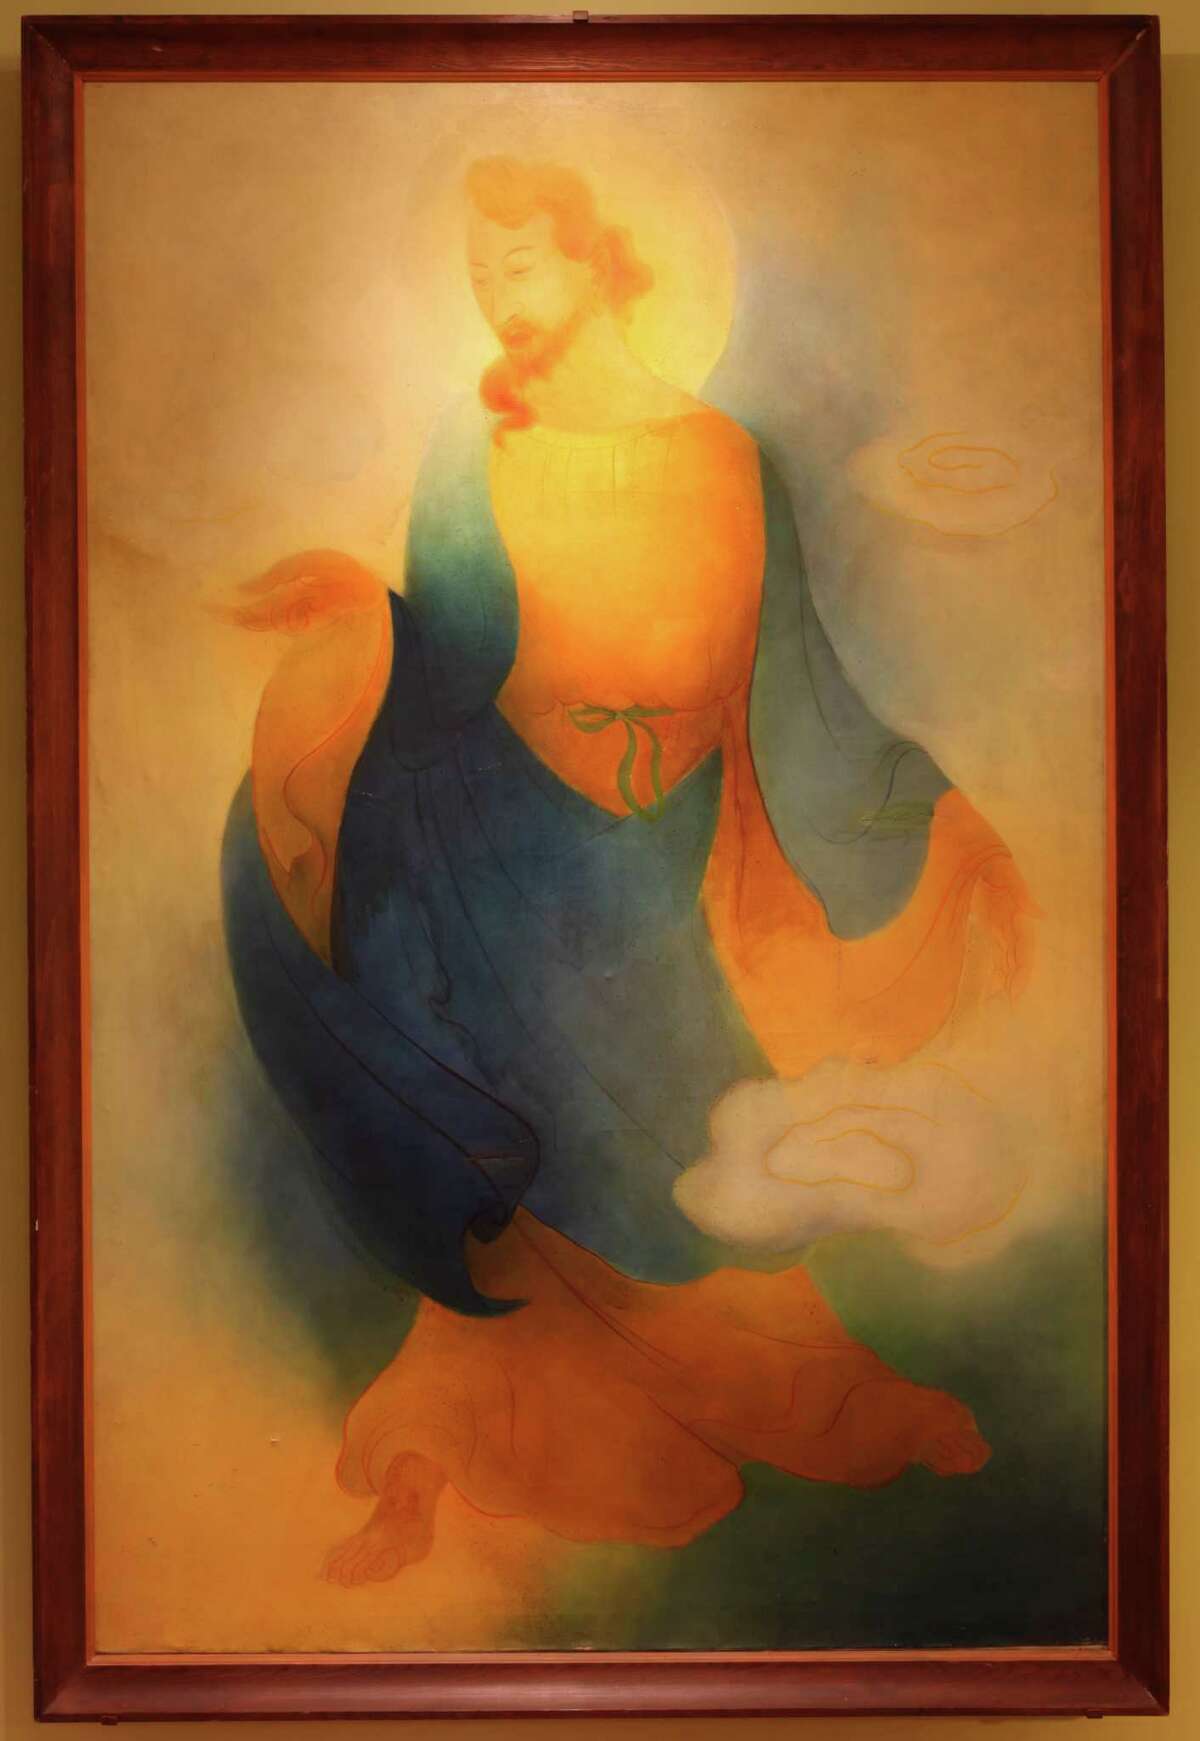 “The Chinese Jesus” by Tyrus Wong